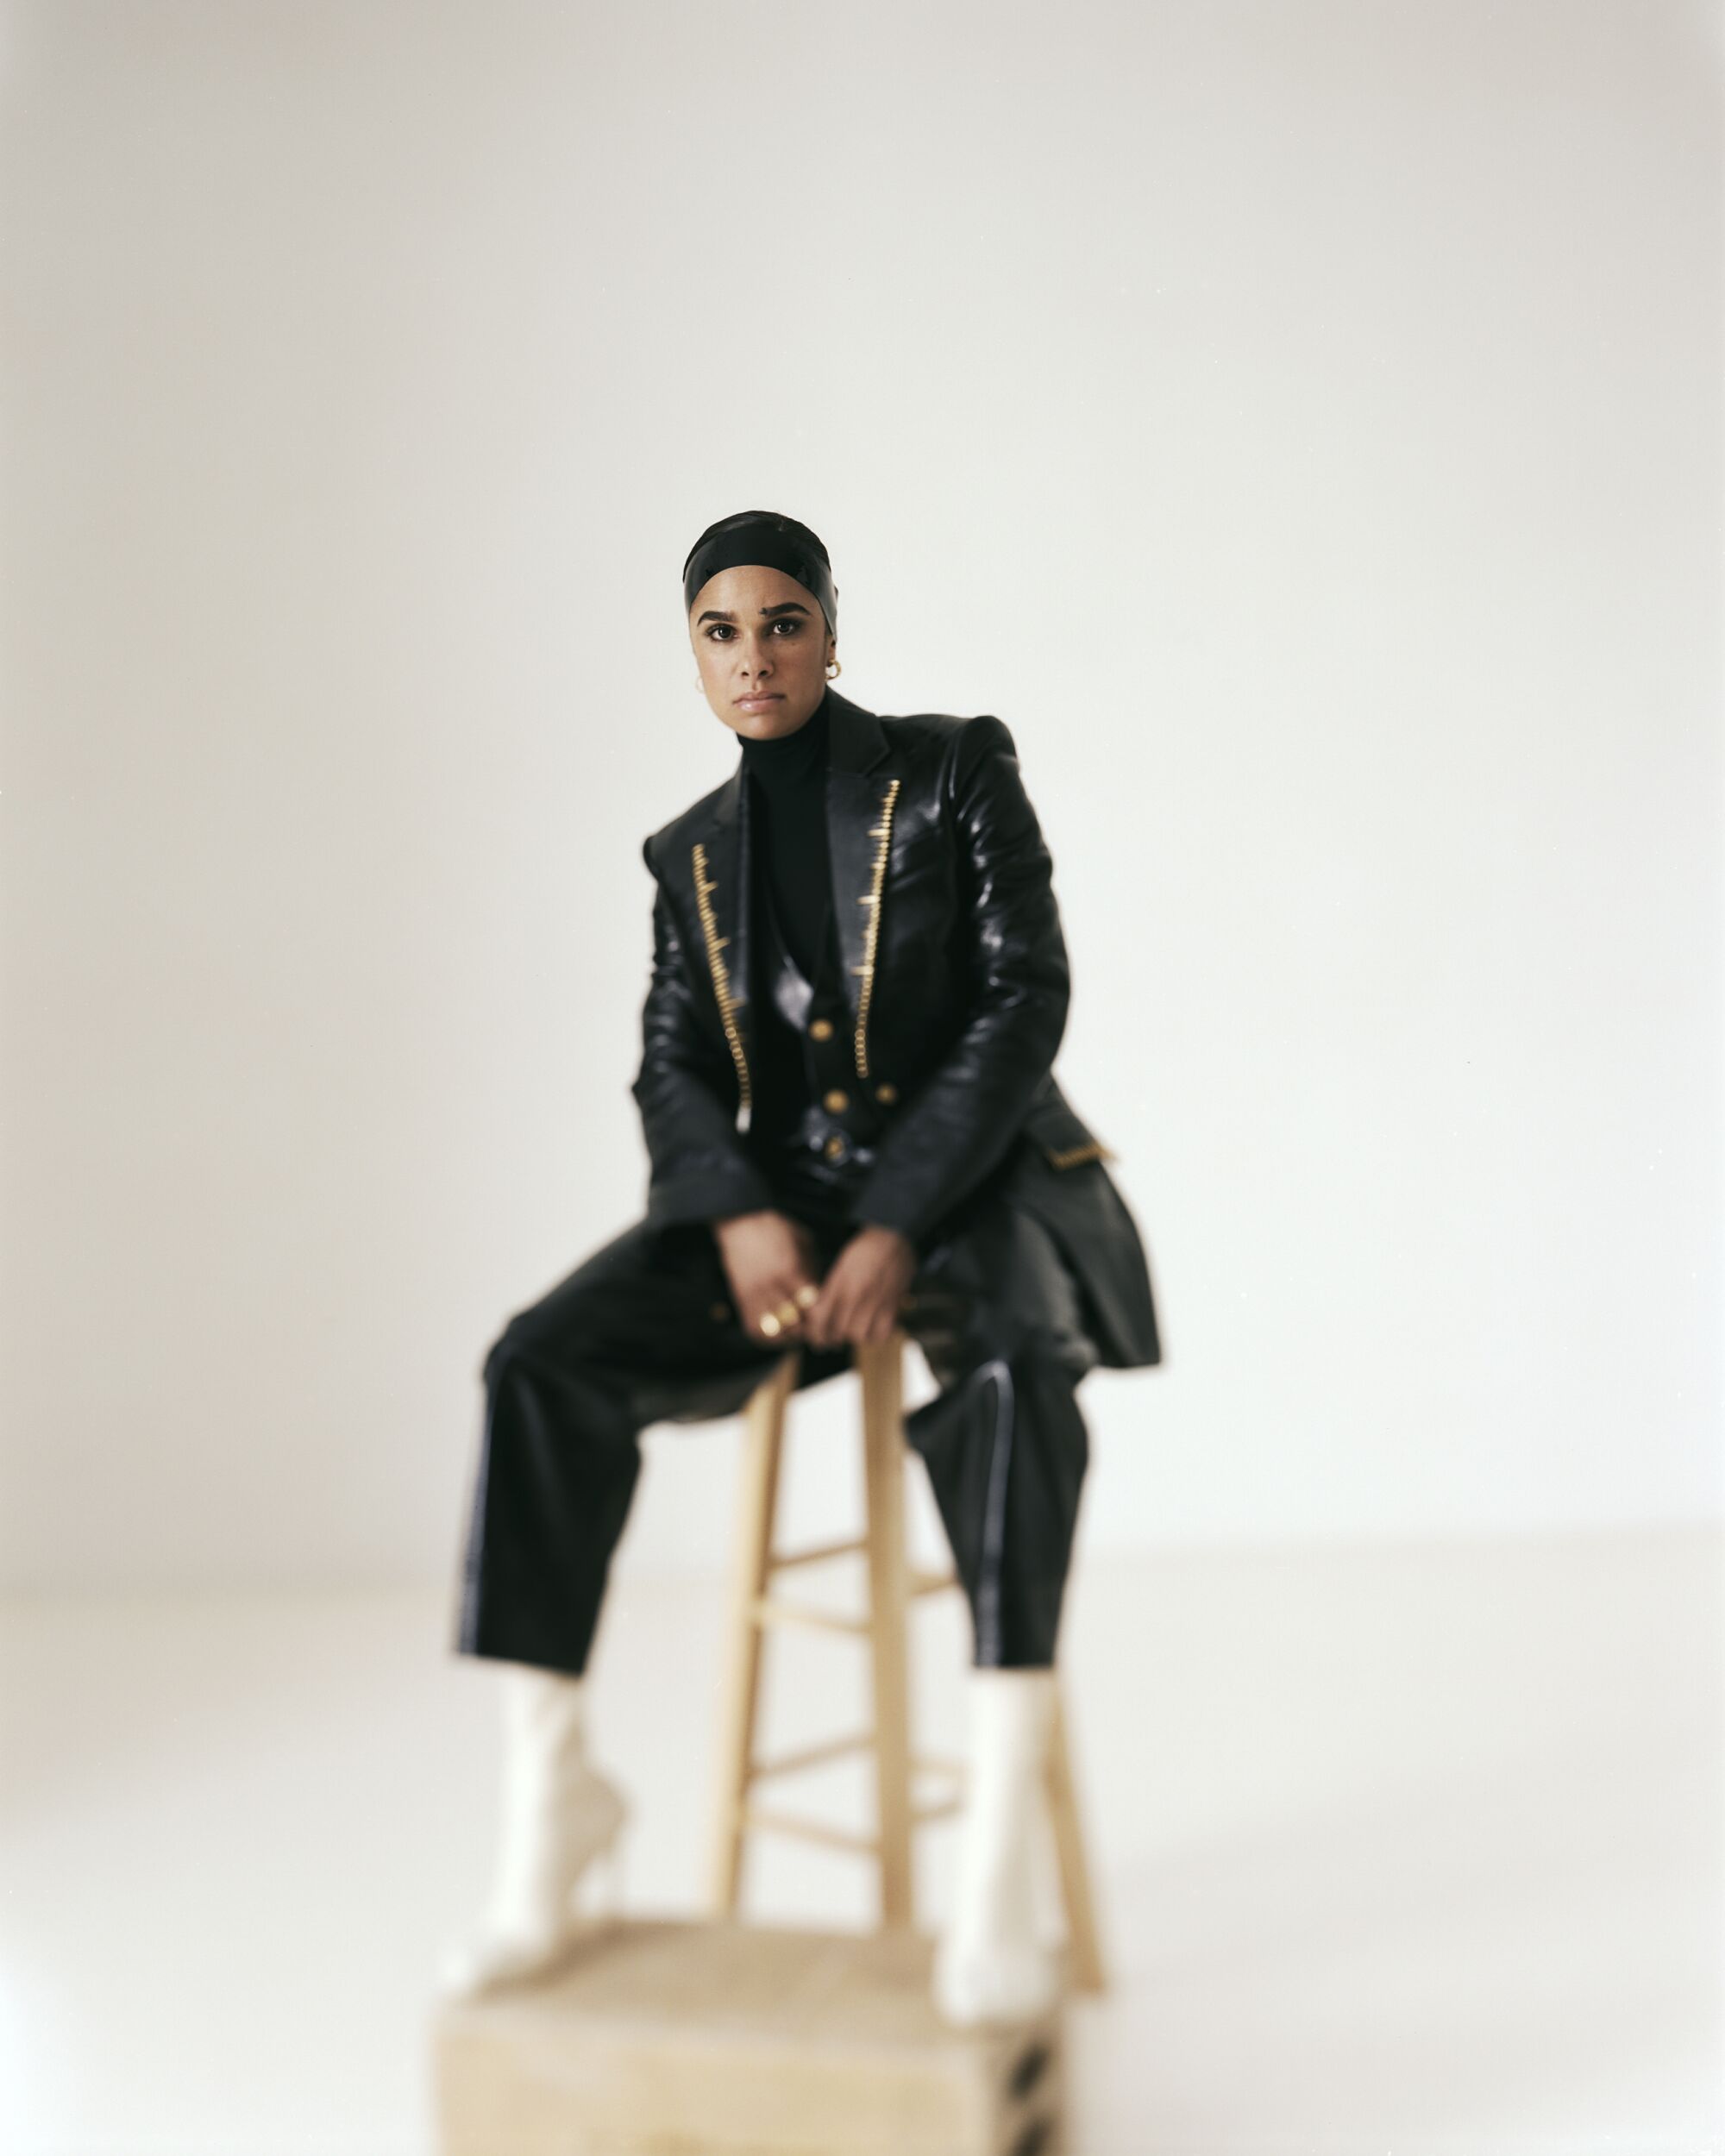 Misty Copeland sitting on a stool wearing a black leather outfit and white boots.